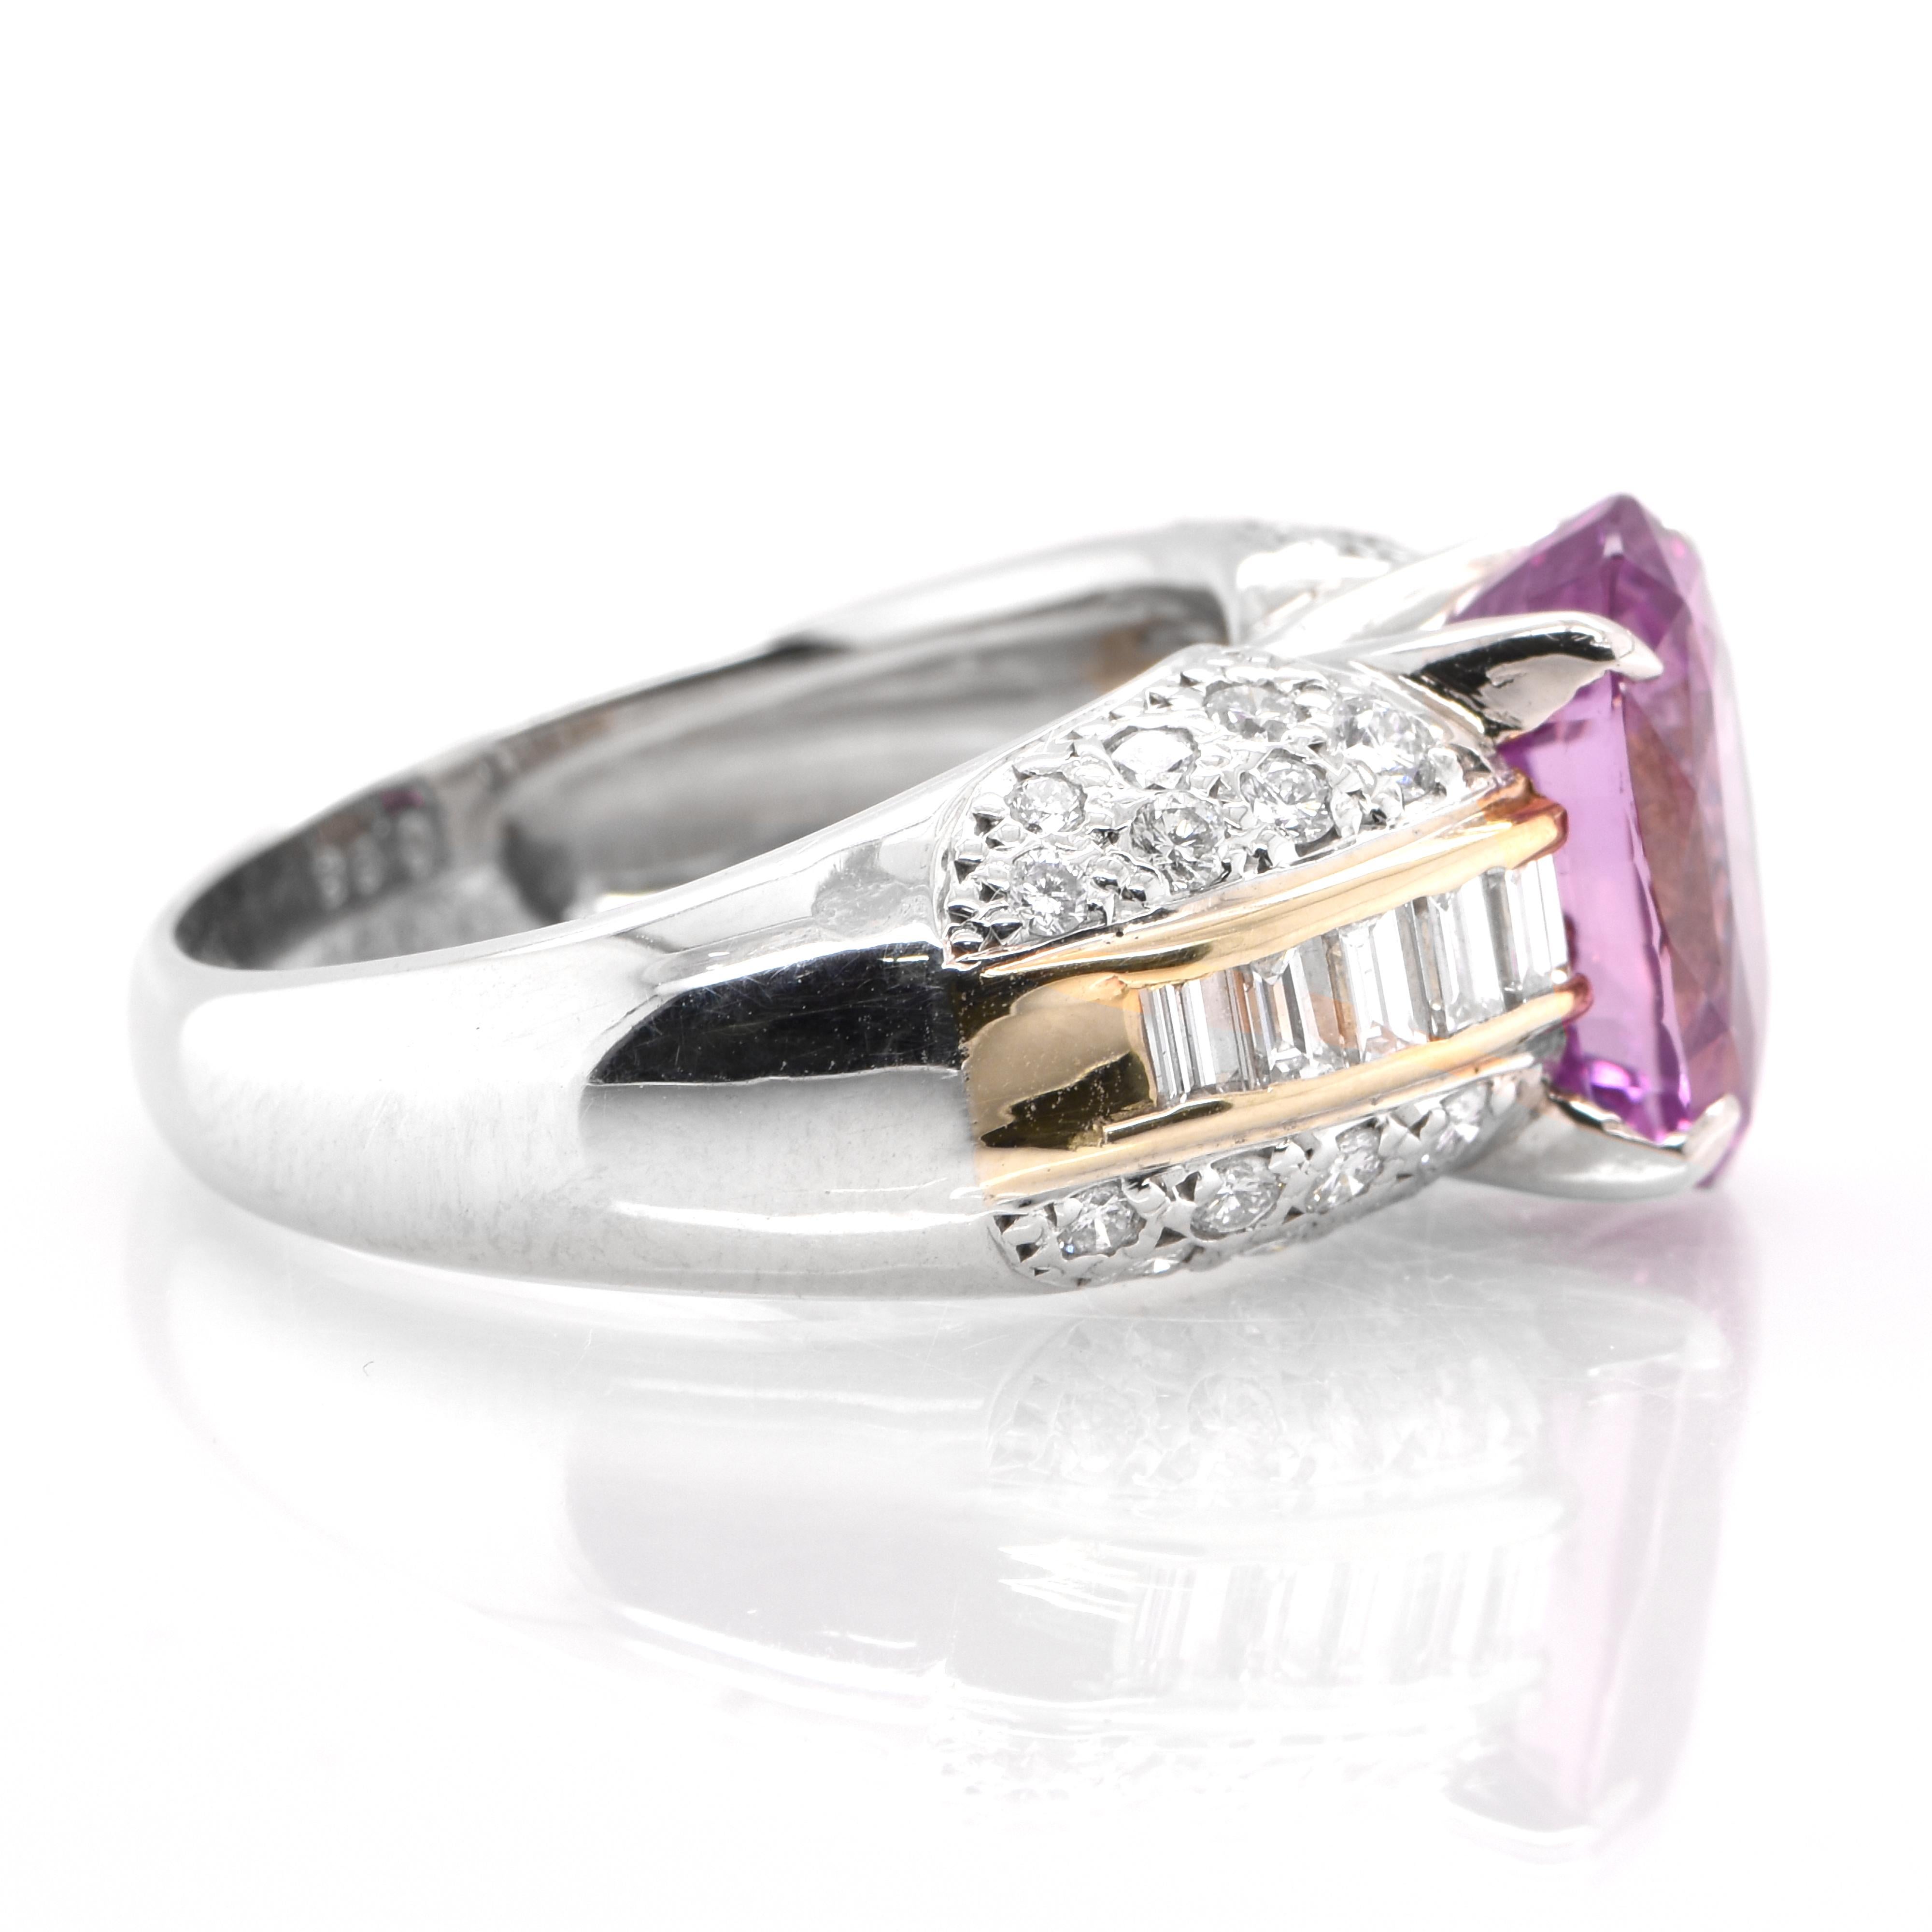 Oval Cut GIA Certified 5.06 Carat Natural Pink Sapphire Ring Set in Platinum and 18K Gold